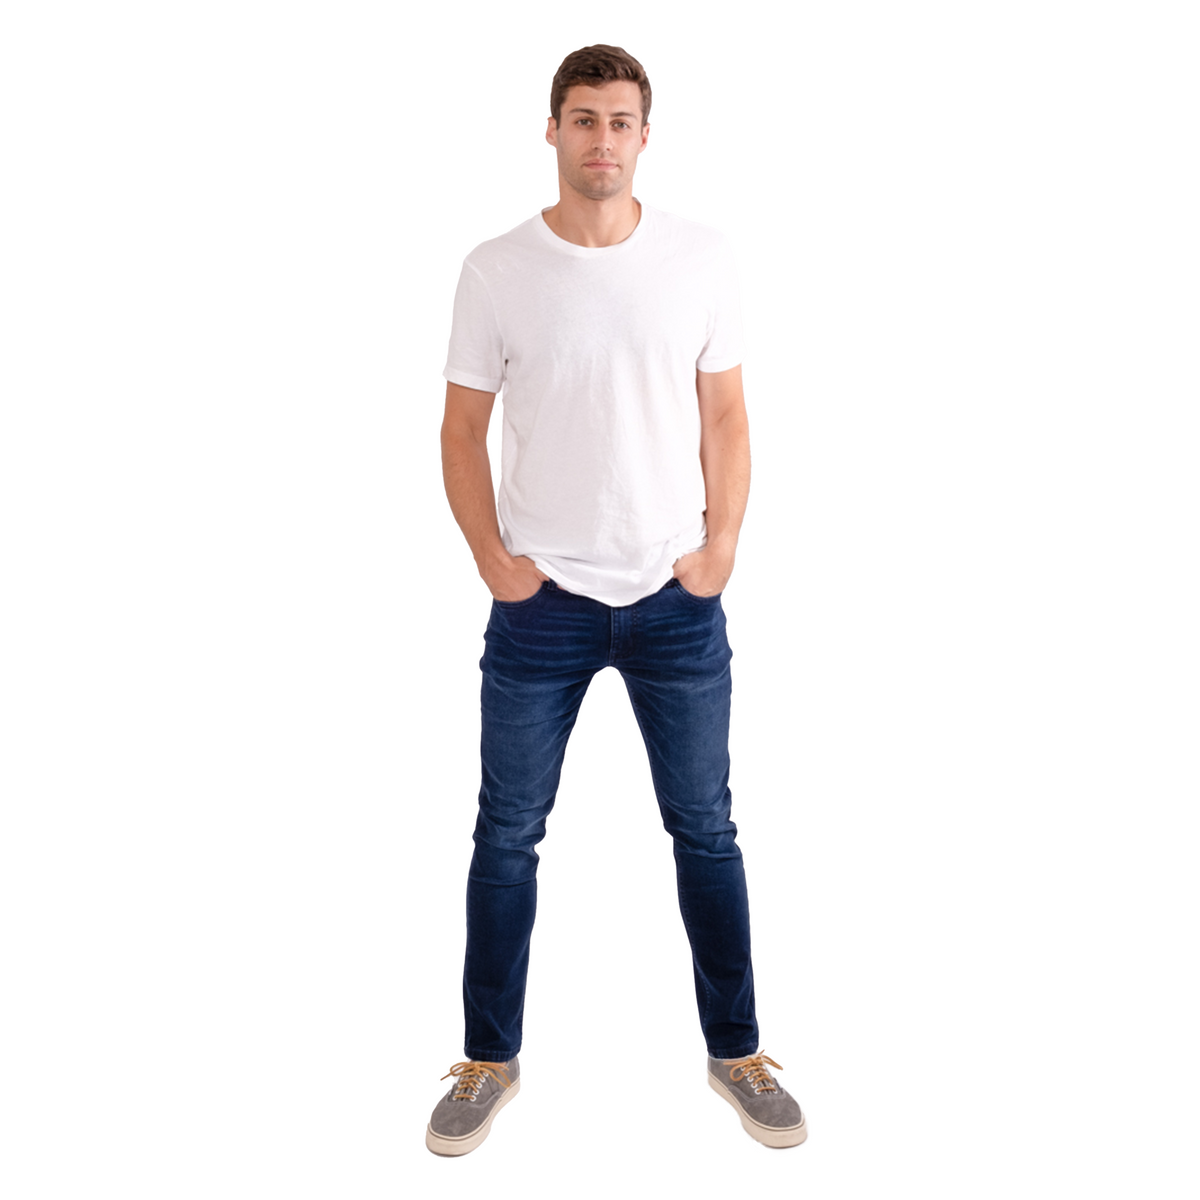 The Perfect Jean  Unbelievably Comfortable Stretch Denim by TPJ